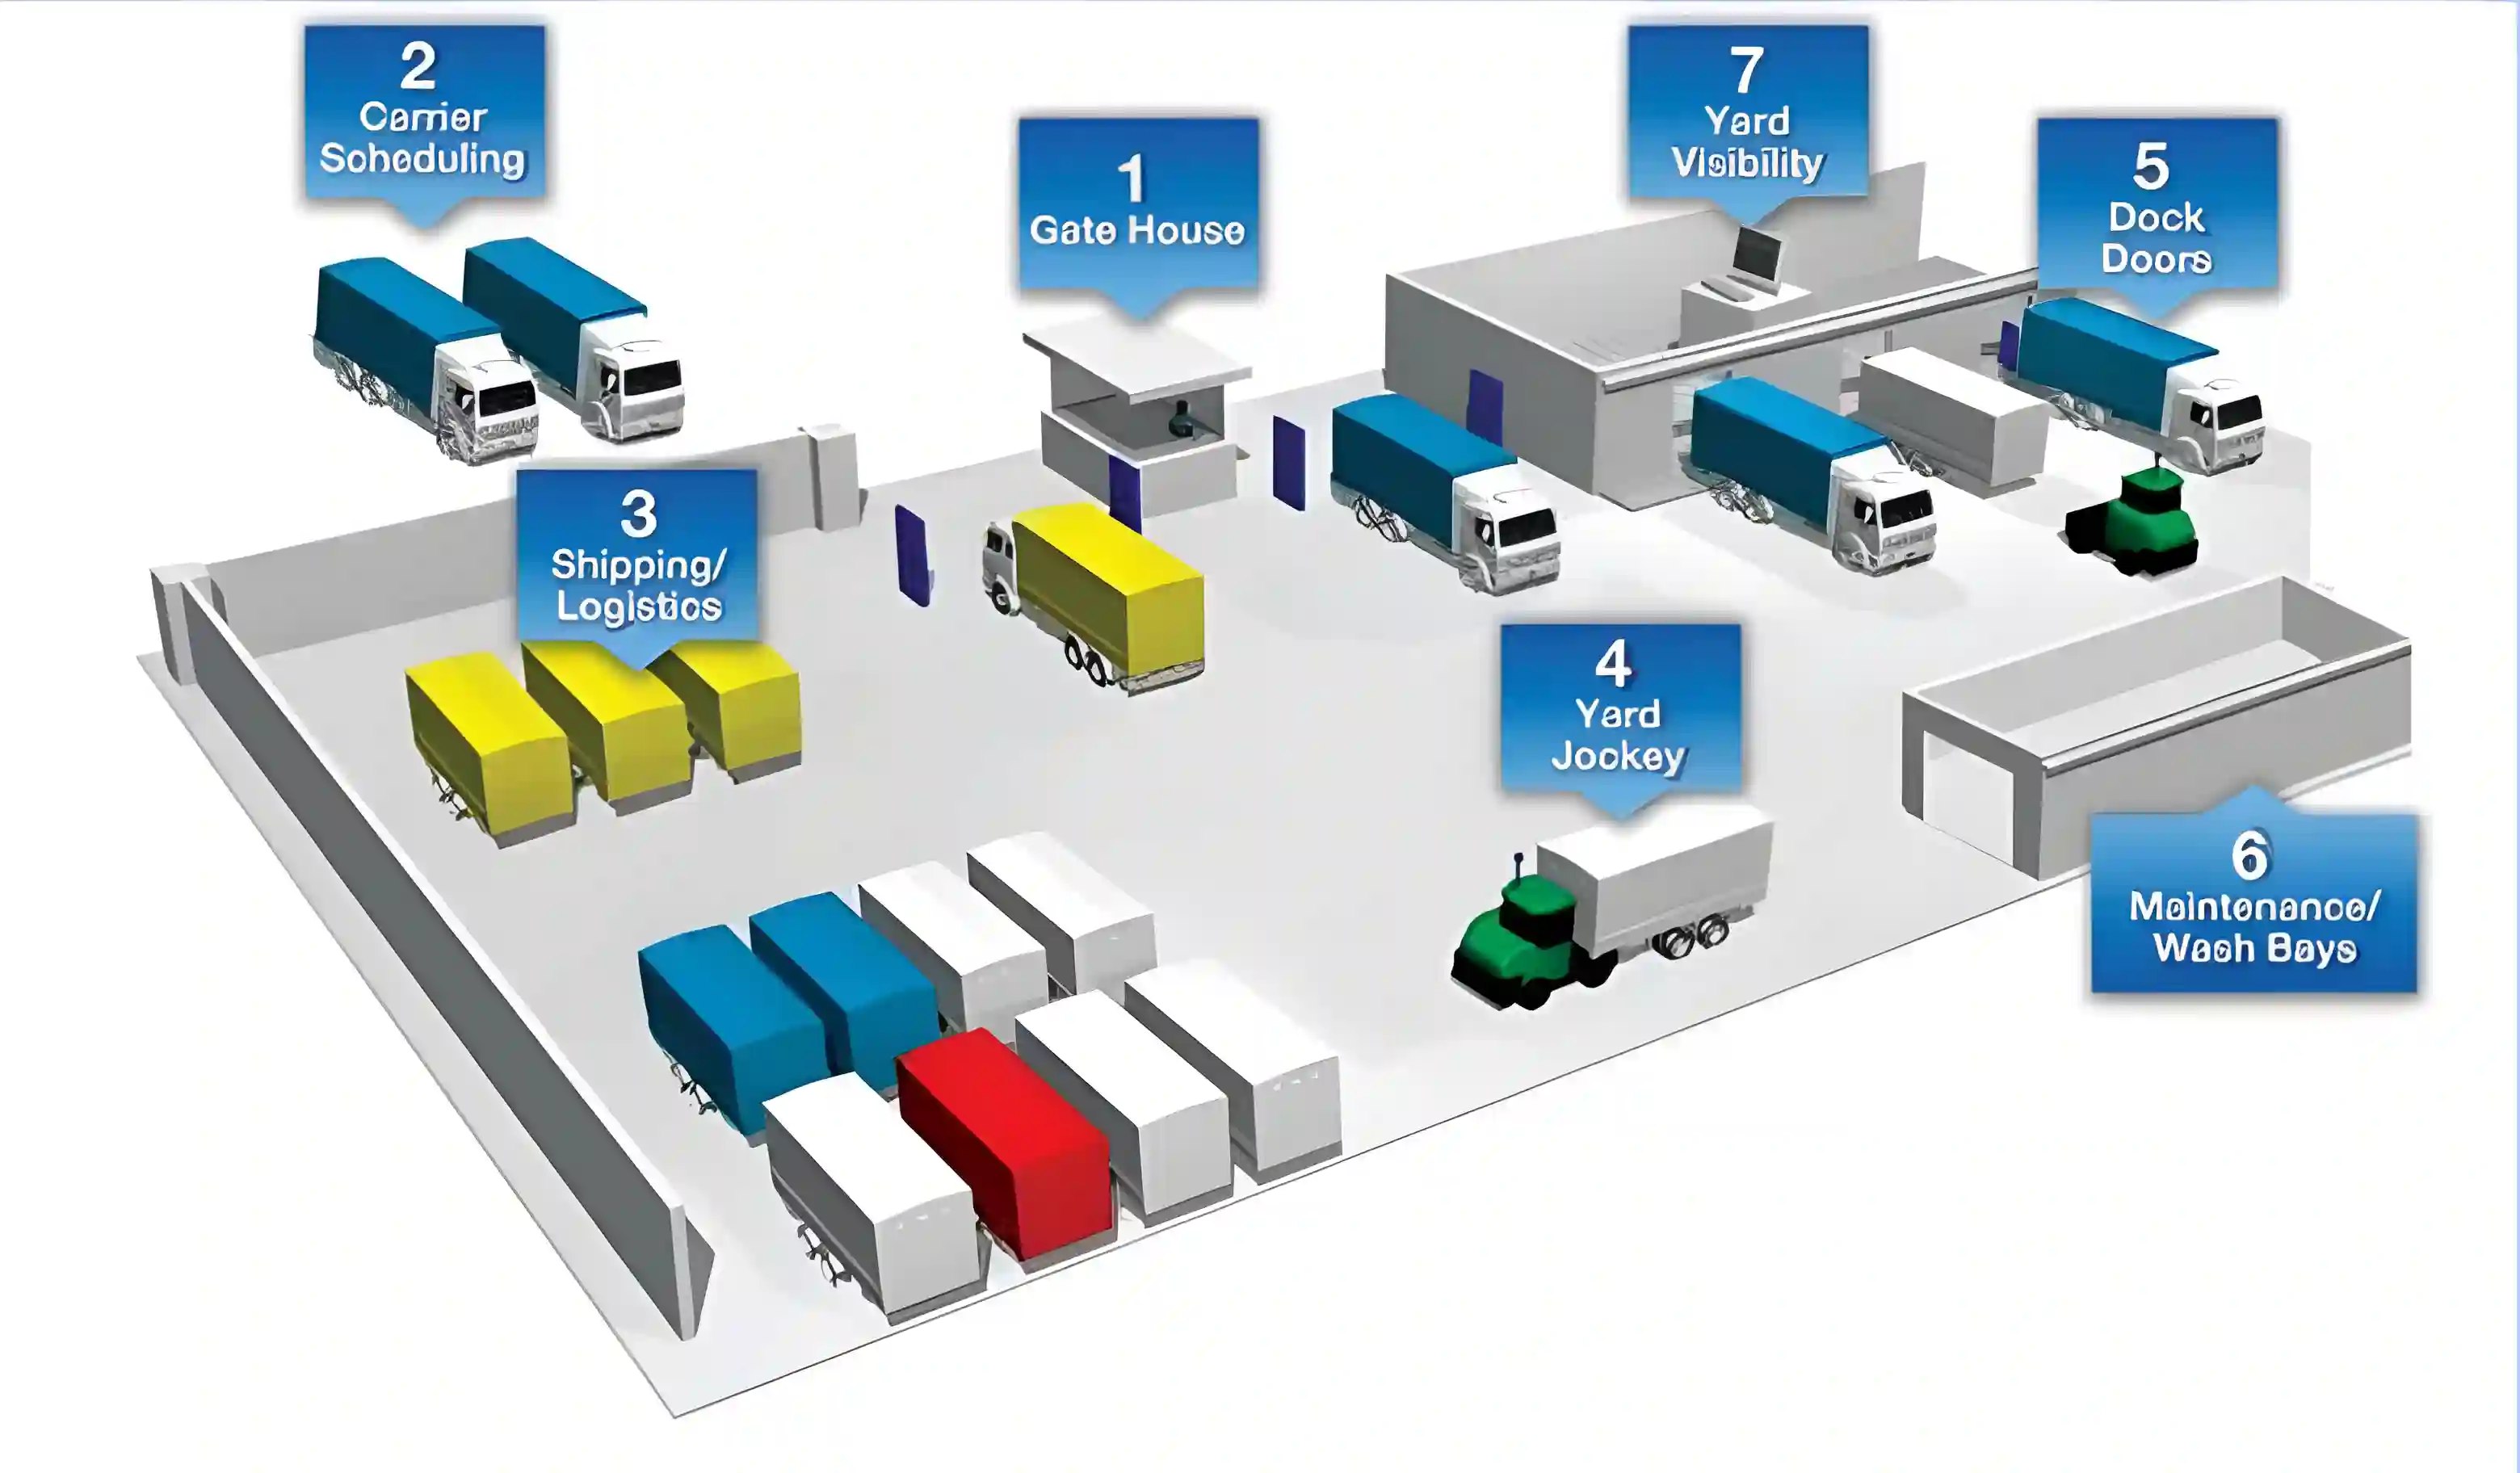 Yard Container Management Software in Logistics